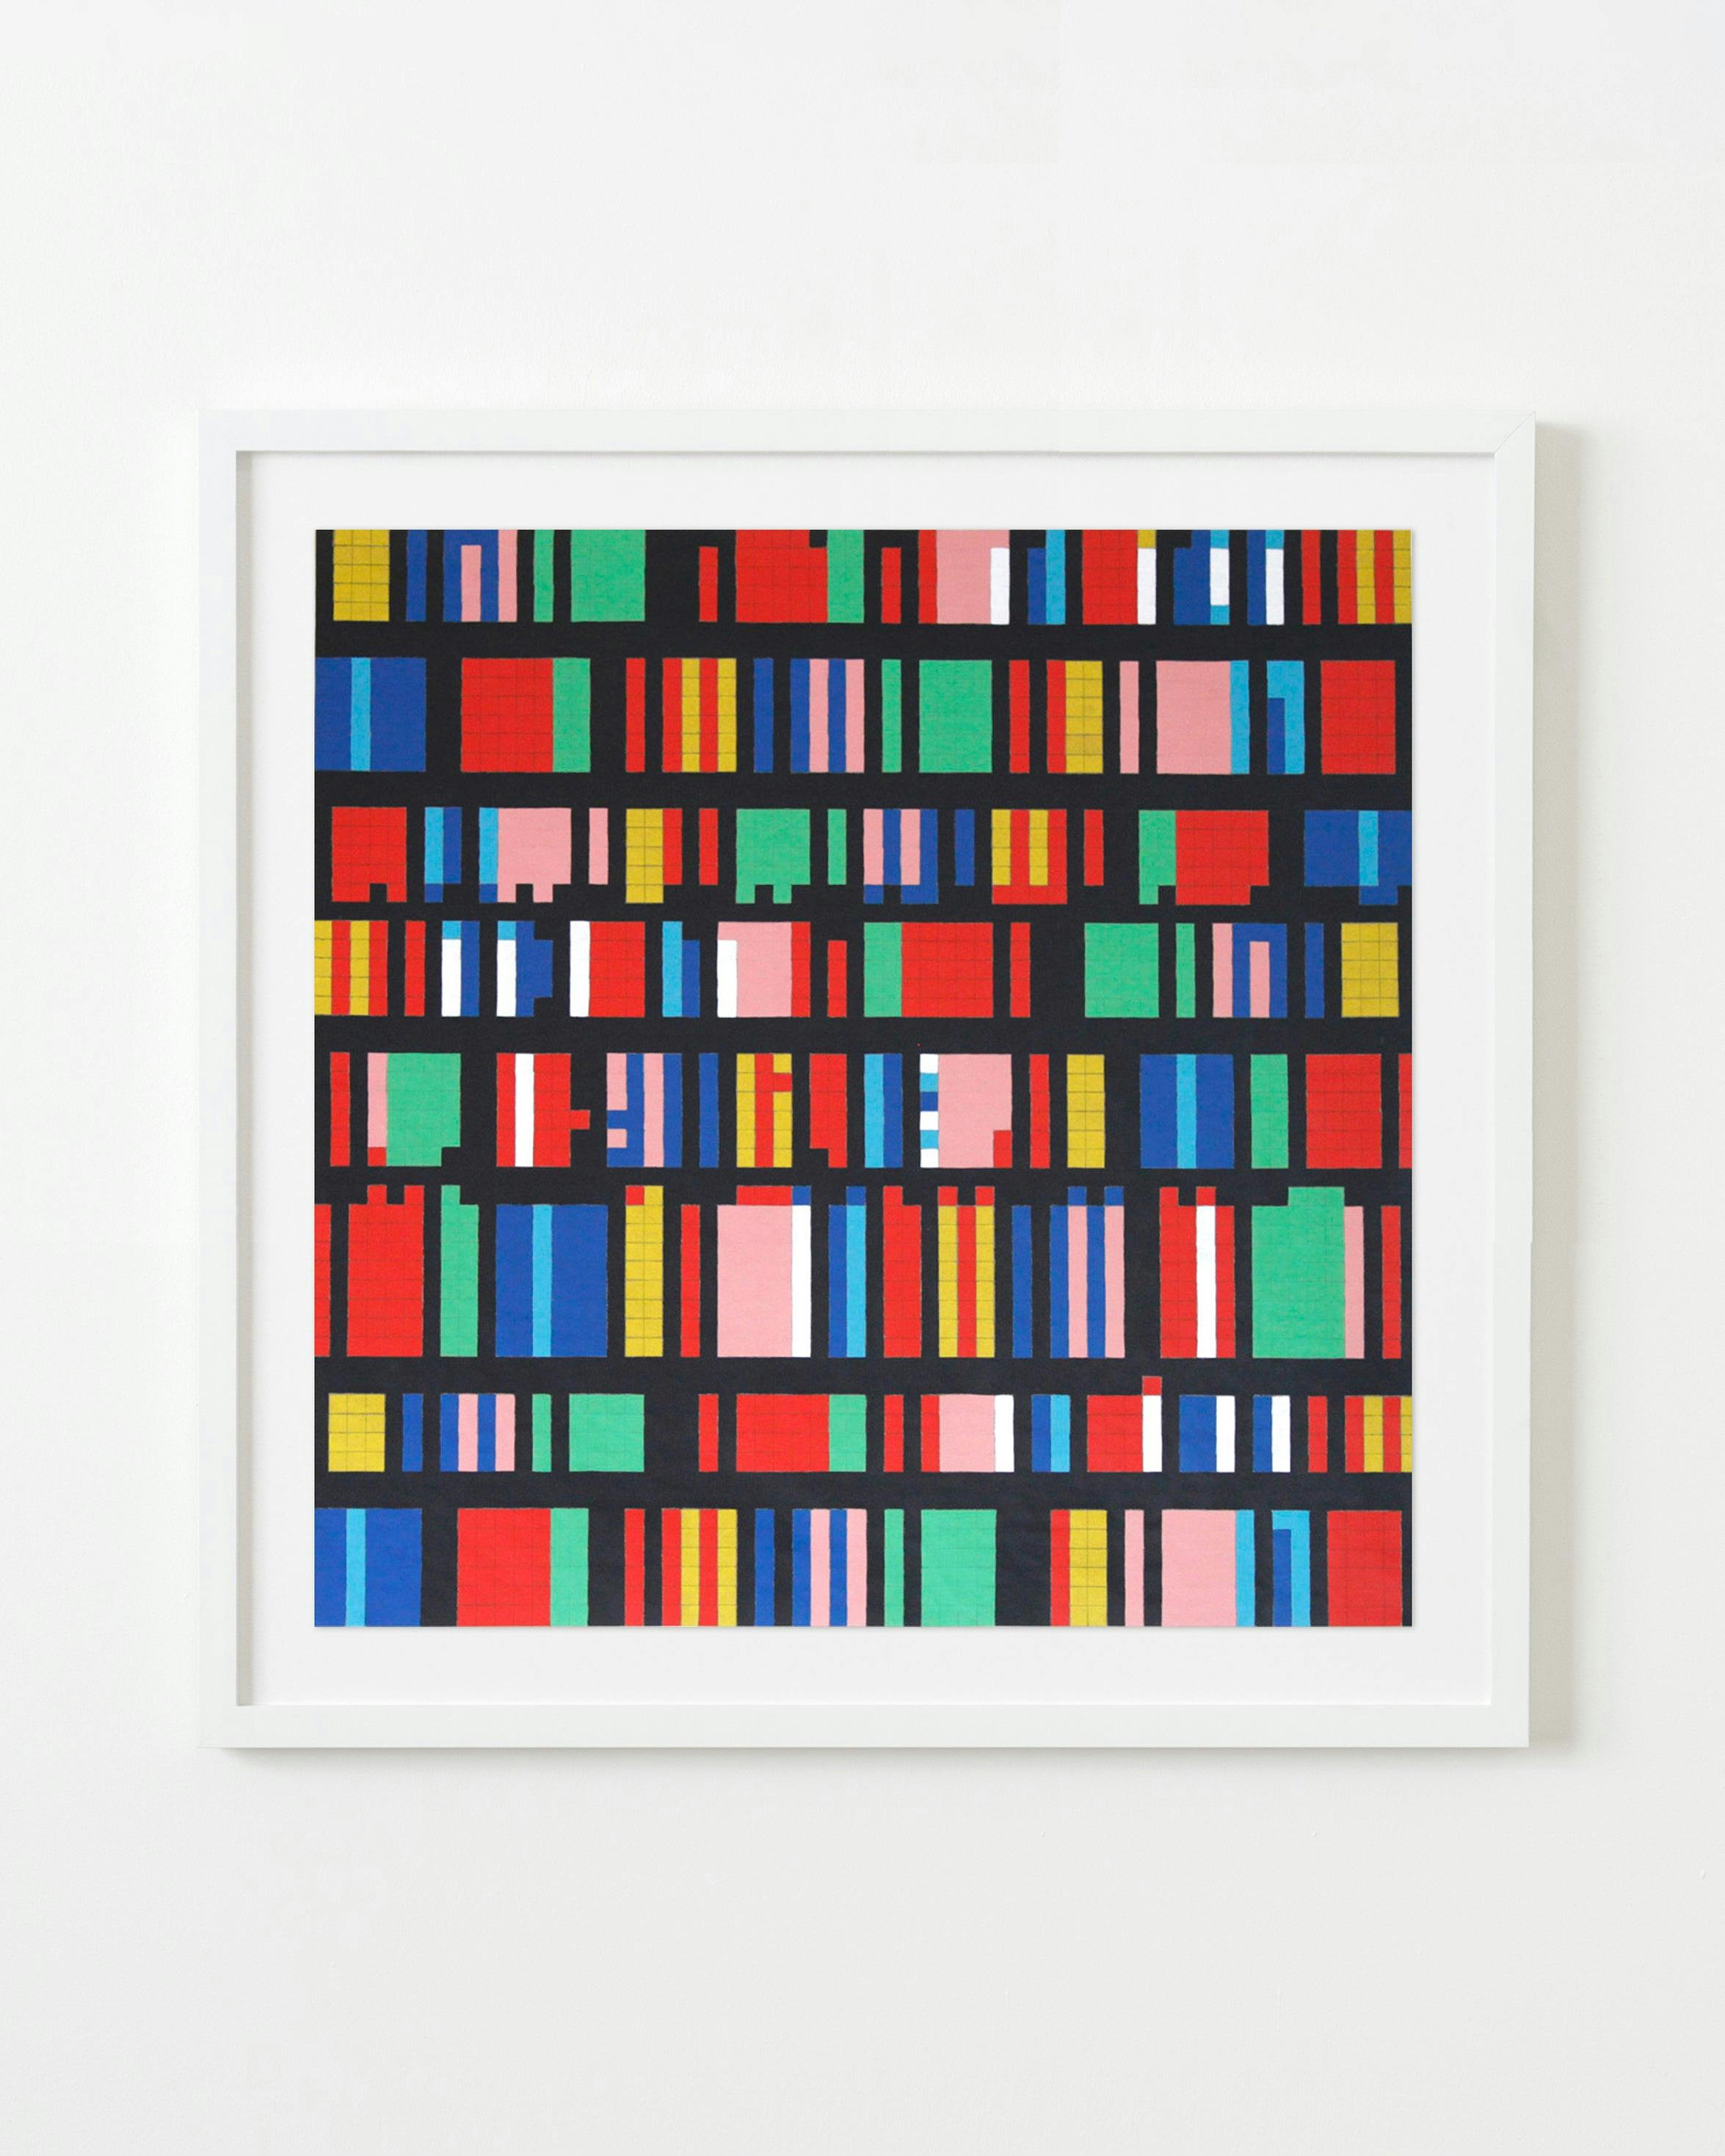 Painting by Robert Otto Epstein titled "8Bitterized + 3".